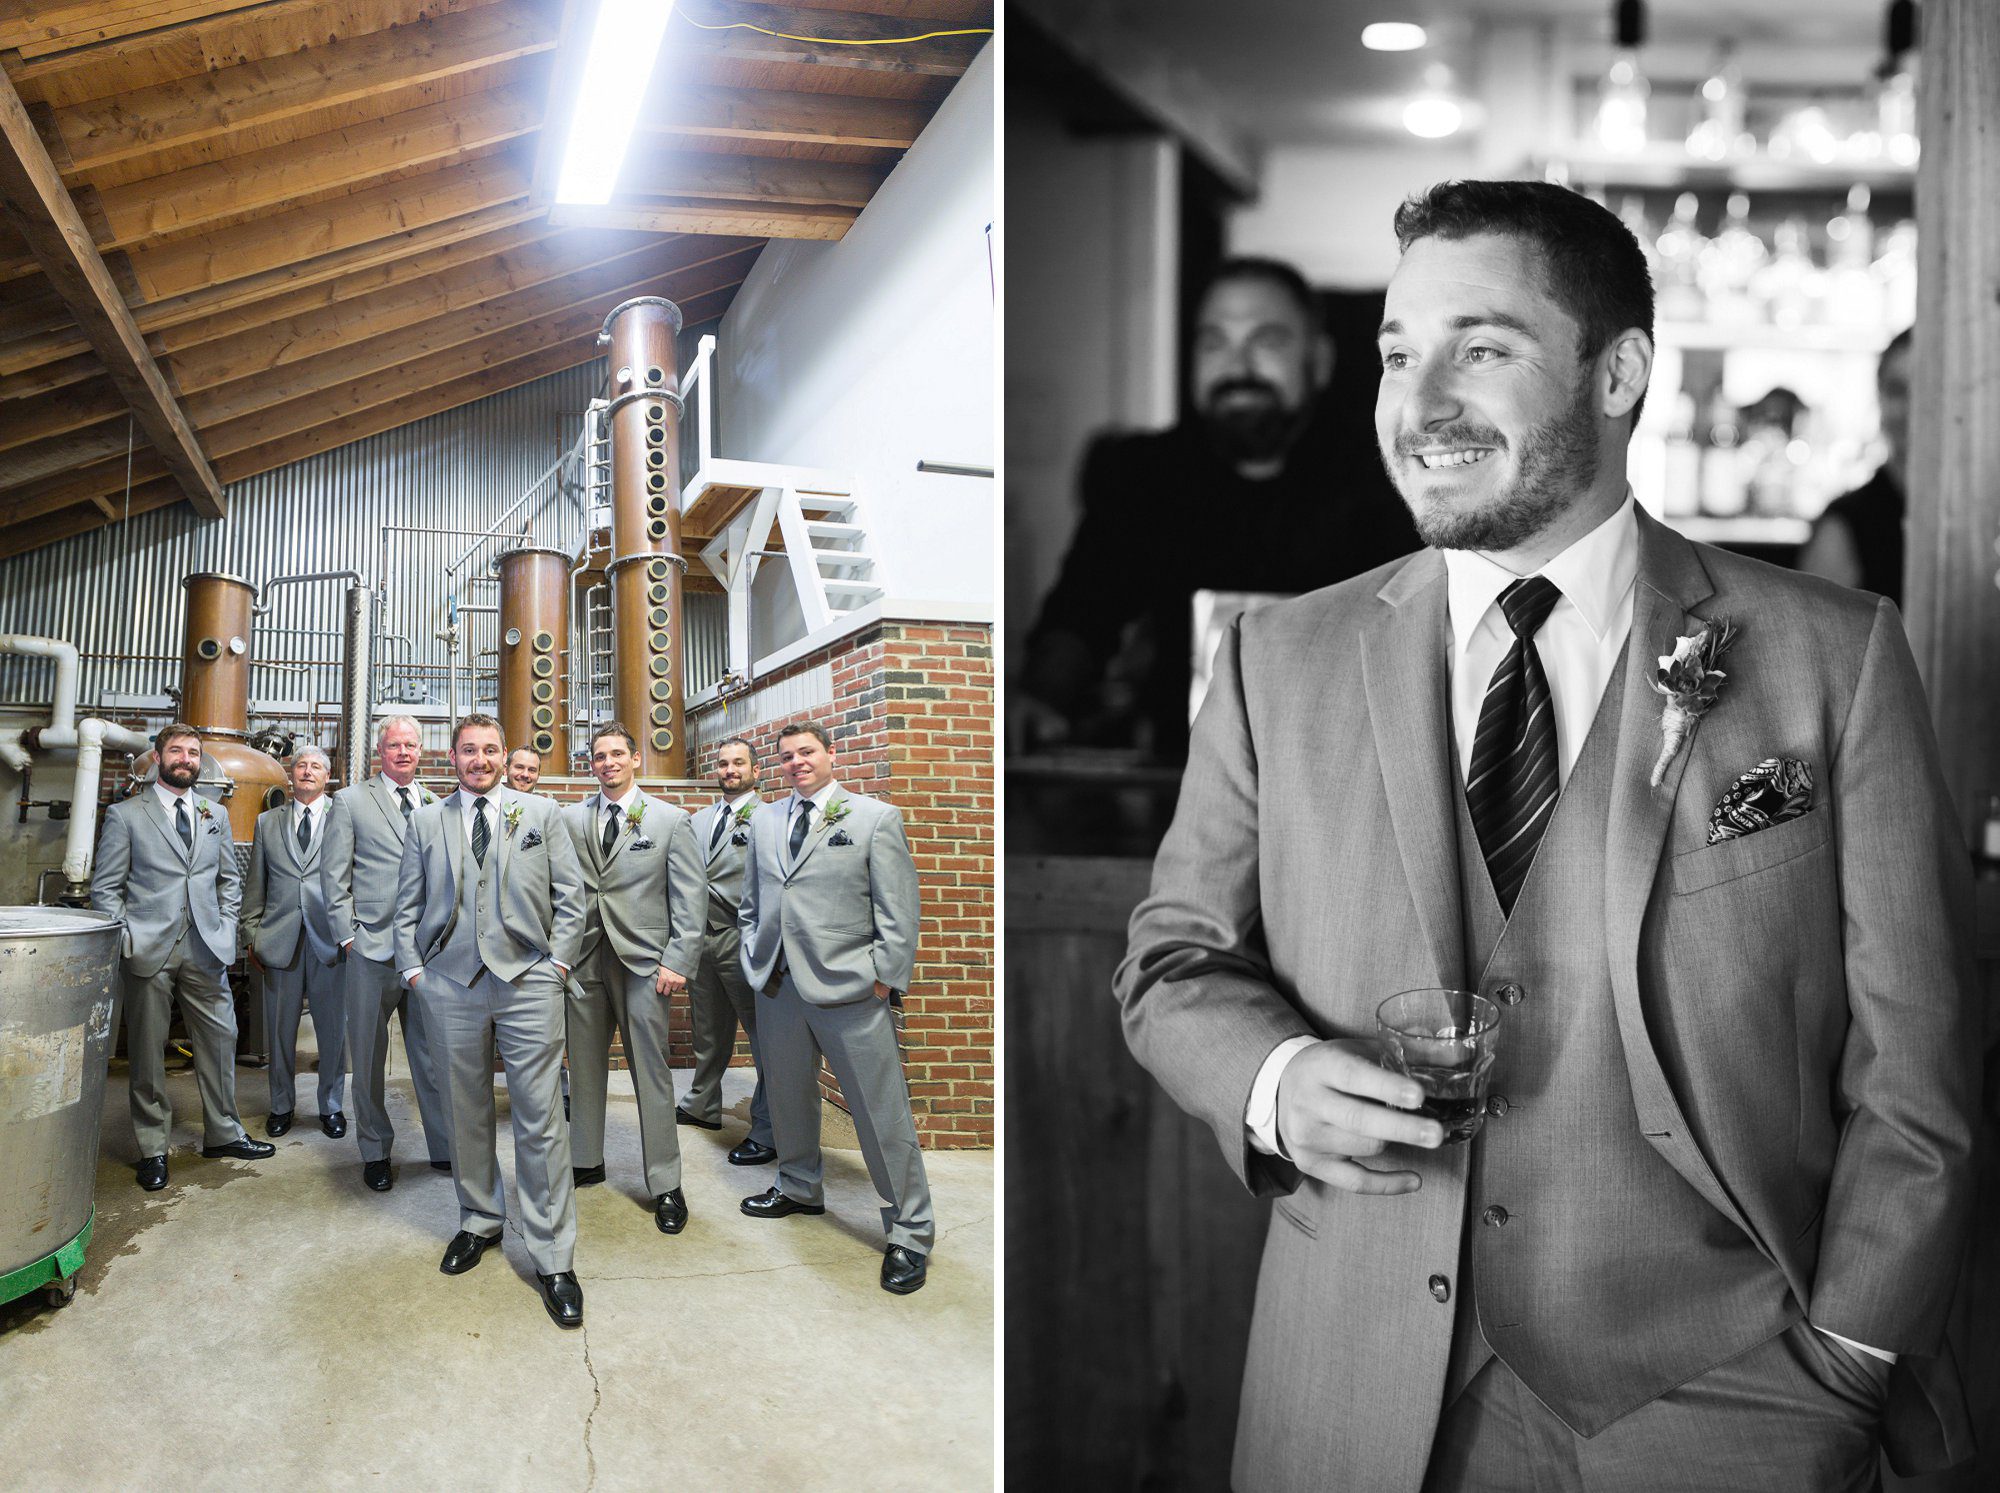 Bridal party portraits at Flag Hill Winery, Lee NH | New Hampshire Wedding Photographer